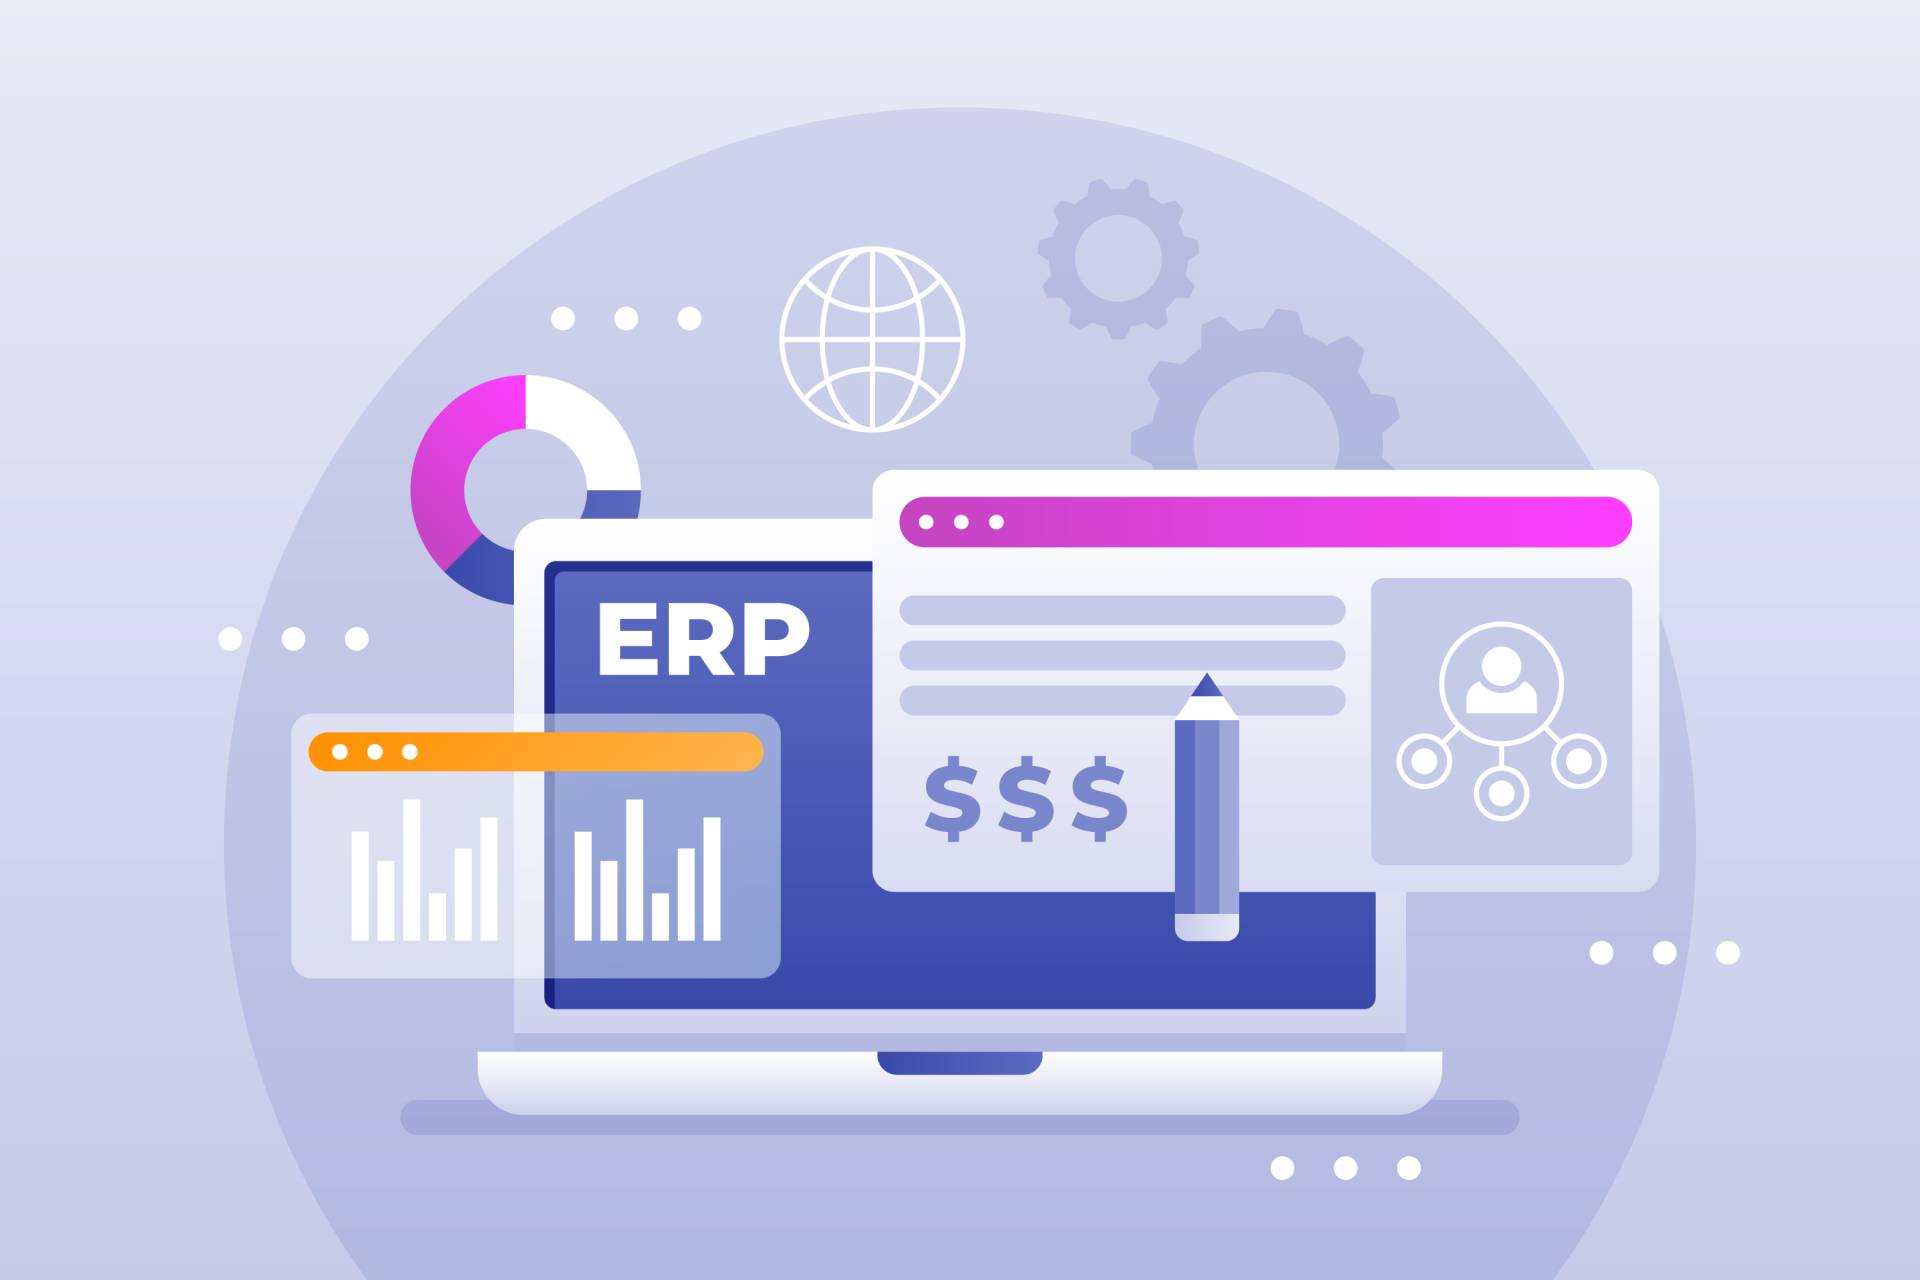 How does ERP Helps to improve Business Operations?